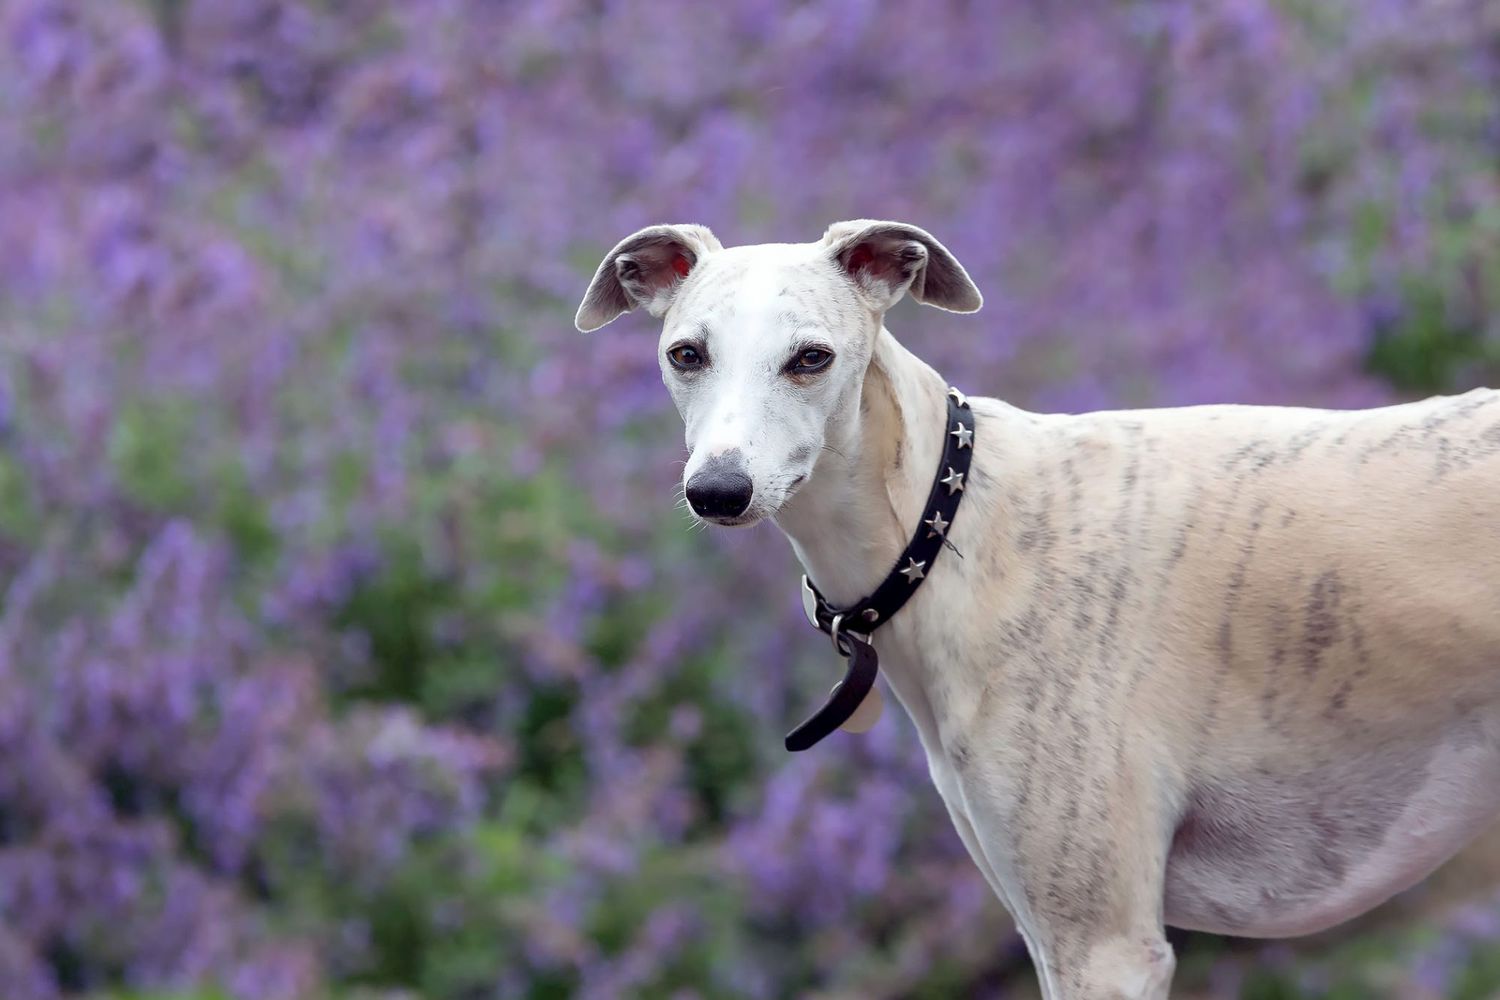 Whippet dog standing in front of catnip; can your dog eat catnip?